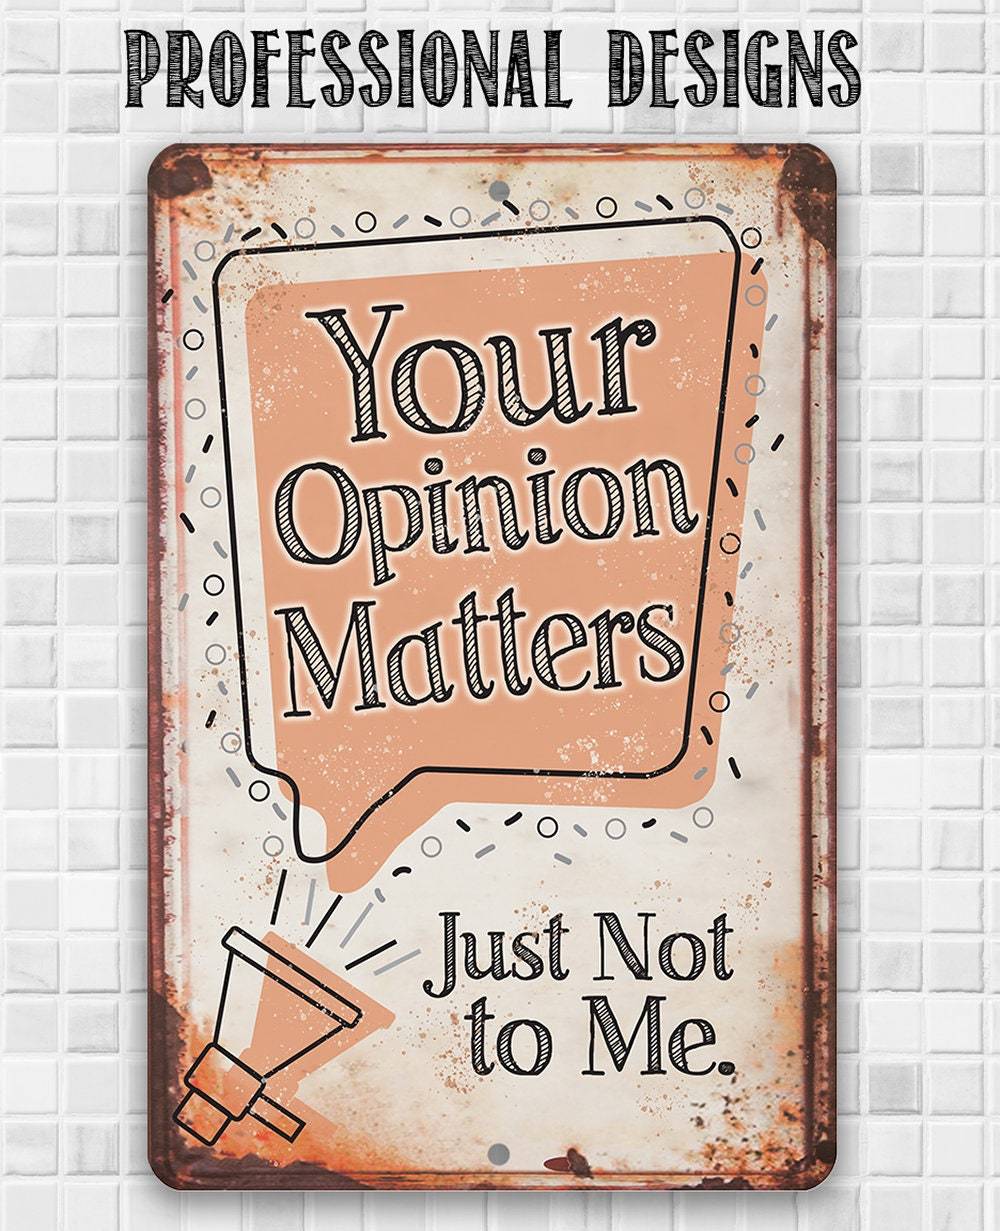 Your Opinion Matters Just Not to Me - Metal Sign | Lone Star Art.